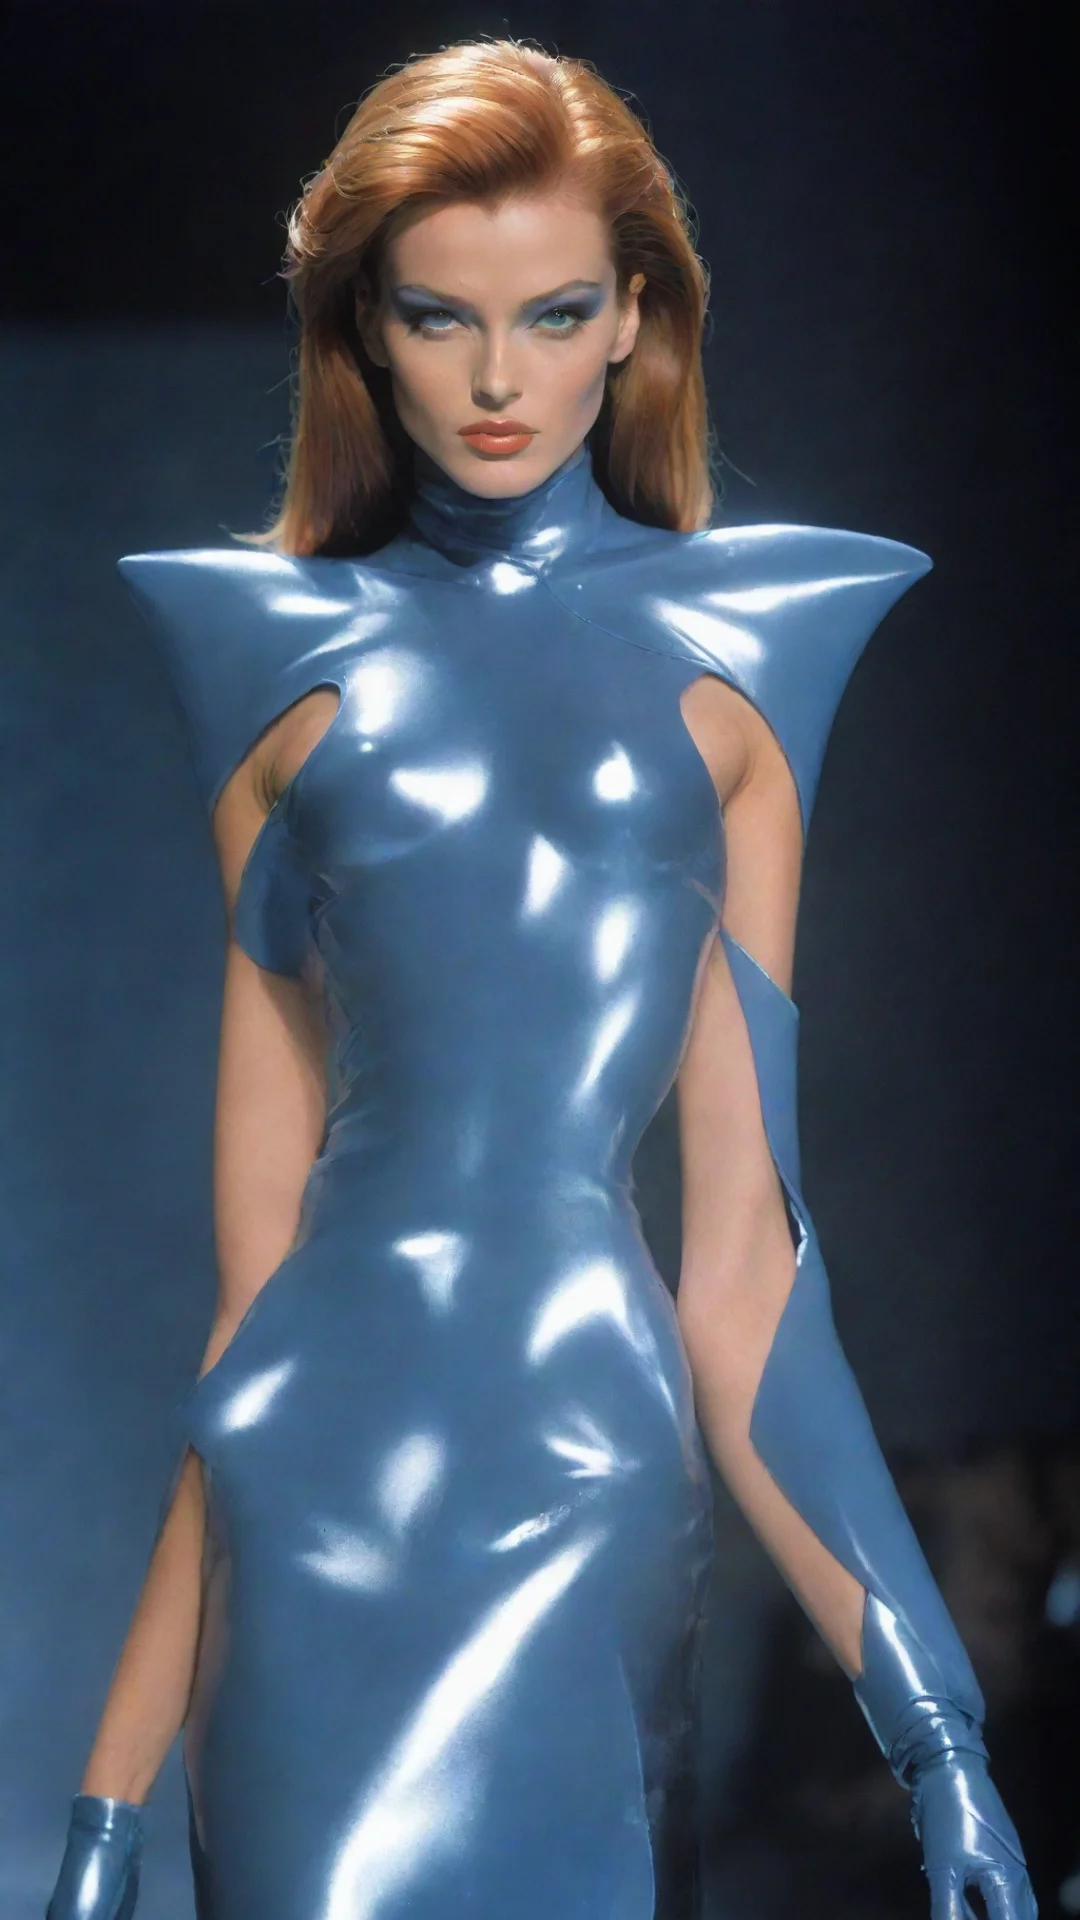 trending thierry mugler fashion style futuristic supermodel good looking fantastic 1 tall